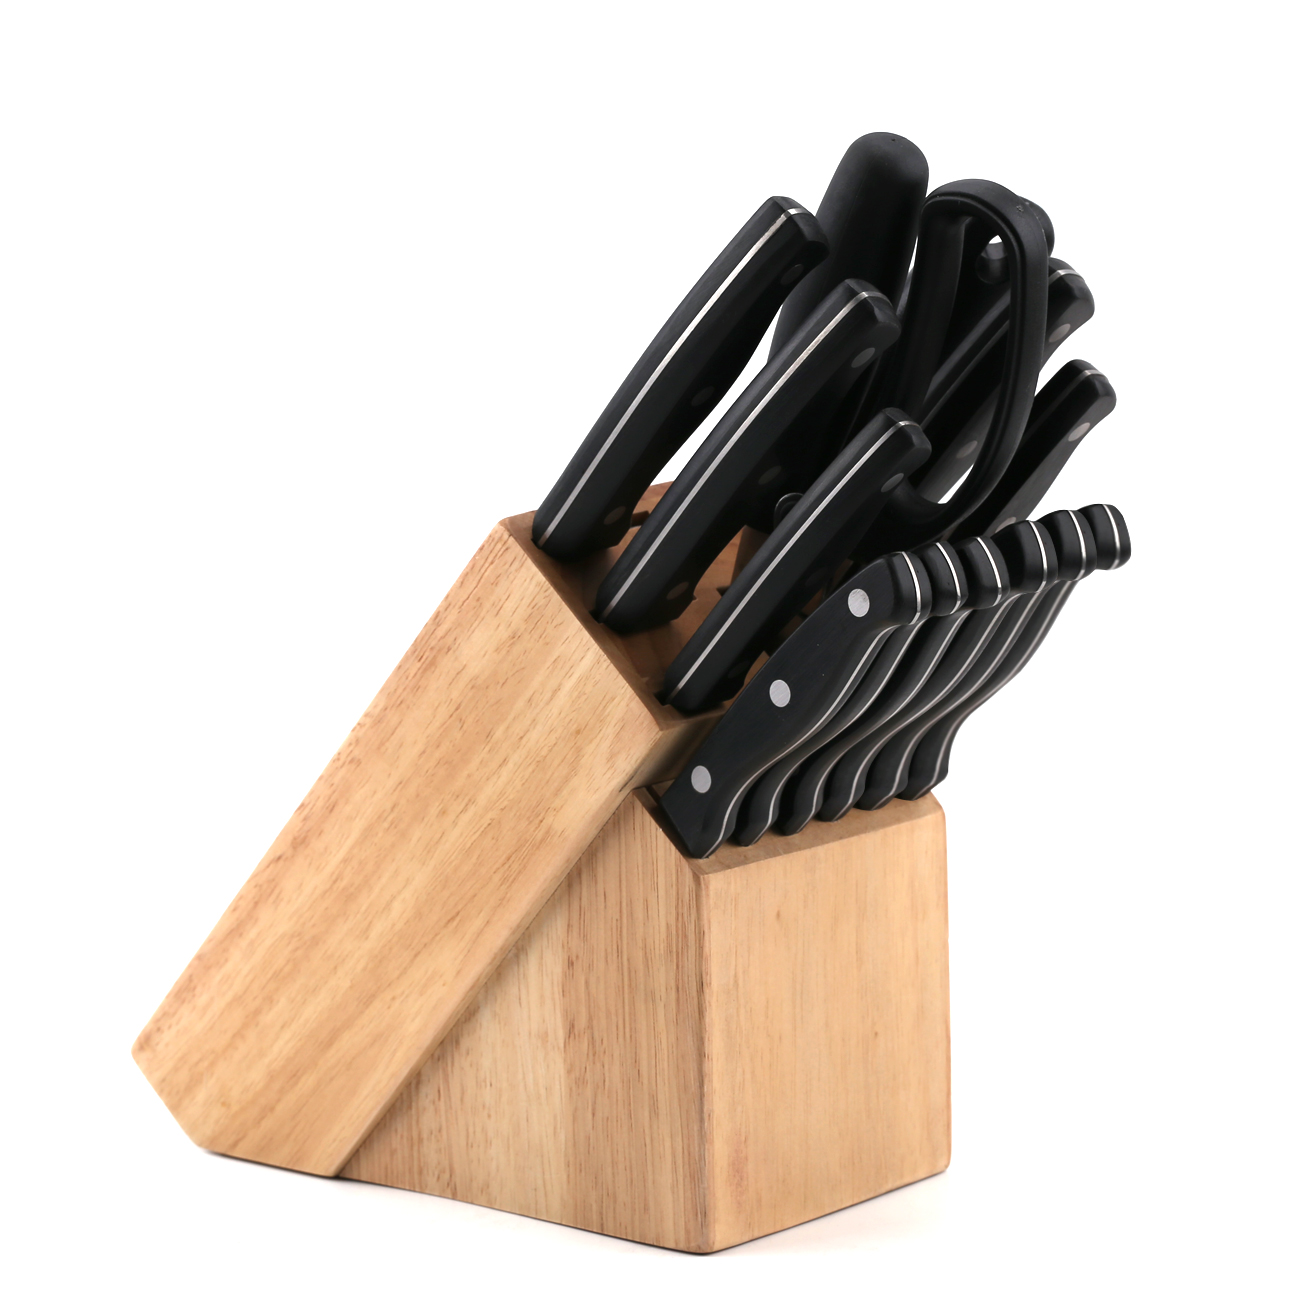 J104-14-Piece Premium Kitchen Knife Block Set, High-Carbon Stainless Steel-ZX | kitchen knife,Kitchen tools,Silicone Cake Mould,Cutting Board,Baking Tool Sets,Chef Knife,Steak Knife,Slicer knife,Utility Knife,Paring Knife,Knife block,Knife Stand,Santoku Knife,toddler Knife,Plastic Knife,Non Stick Painting Knife,Colorful Knife,Stainless Steel Knife,Can opener,bottle Opener,Tea Strainer,Grater,Egg Beater,Nylon Kitchen tool,Silicone Kitchen Tool,Cookie Cutter,Cooking Knife Set,Knife Sharpener,Peeler,Cake Knife,Cheese Knife,Pizza Knife,Silicone Spatular,Silicone Spoon,Food Tong,Forged knife,Kitchen Scissors,cake baking knives,Children’s Cooking knives,Carving Knife